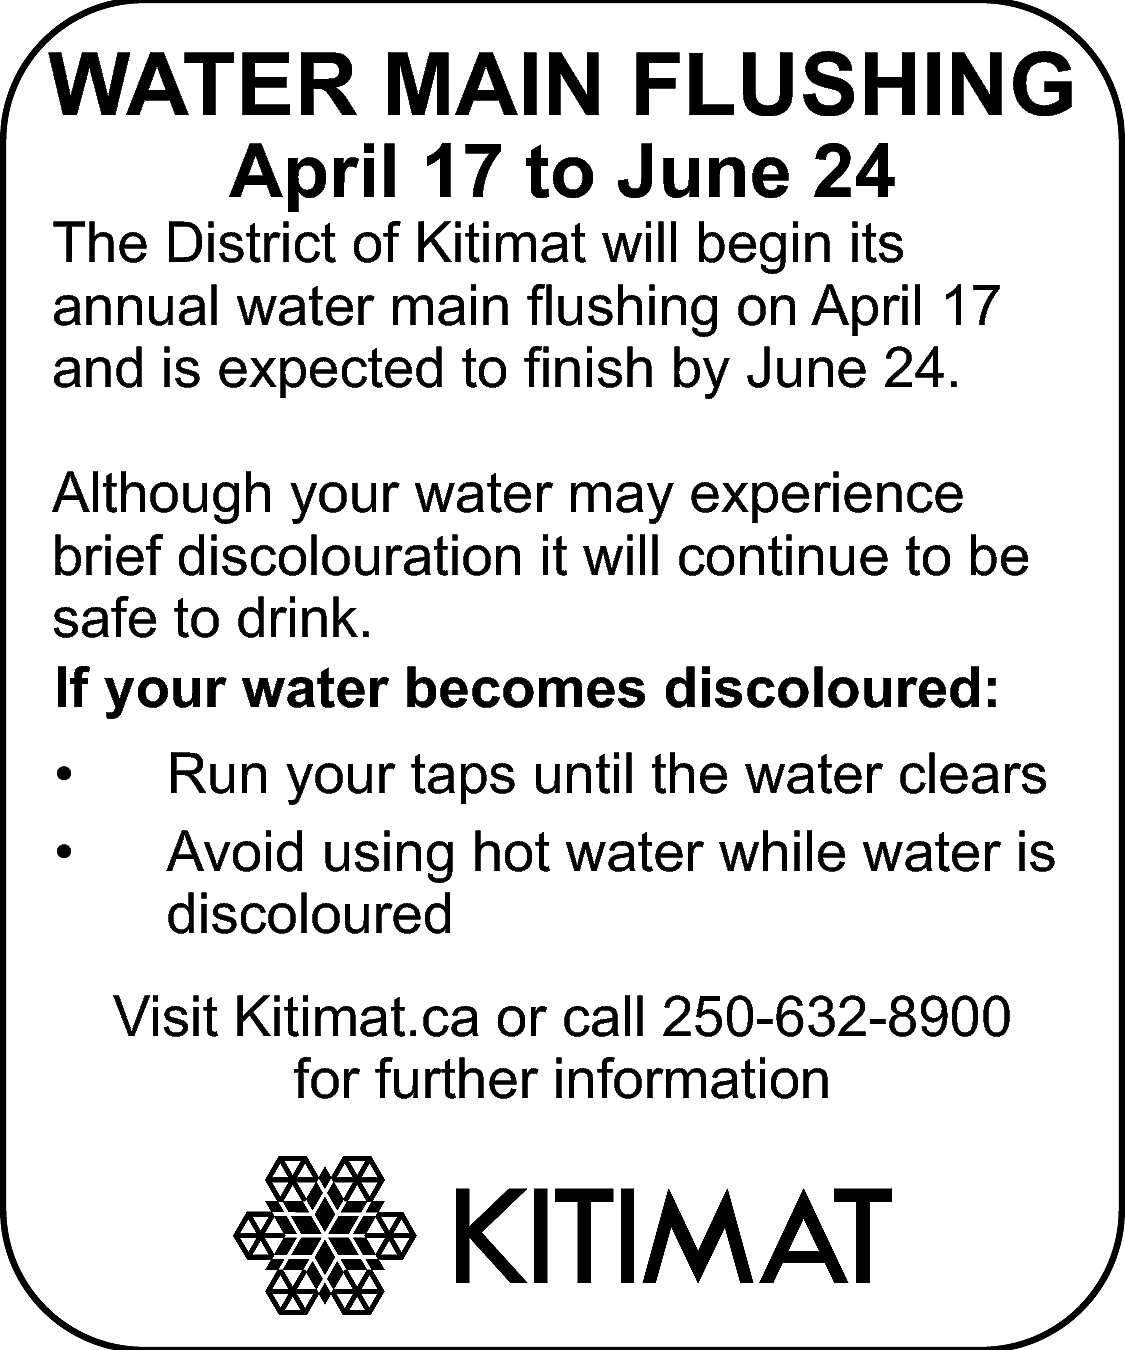 WATER MAIN FLUSHING <br>April 17  WATER MAIN FLUSHING  April 17 to June 24    The District of Kitimat will begin its  annual water main flushing on April 17  and is expected to finish by June 24.  Although your water may experience  brief discolouration it will continue to be  safe to drink.  If your water becomes discoloured:  •  •    Run your taps until the water clears  Avoid using hot water while water is  discoloured  Visit Kitimat.ca or call 250-632-8900  for further information    